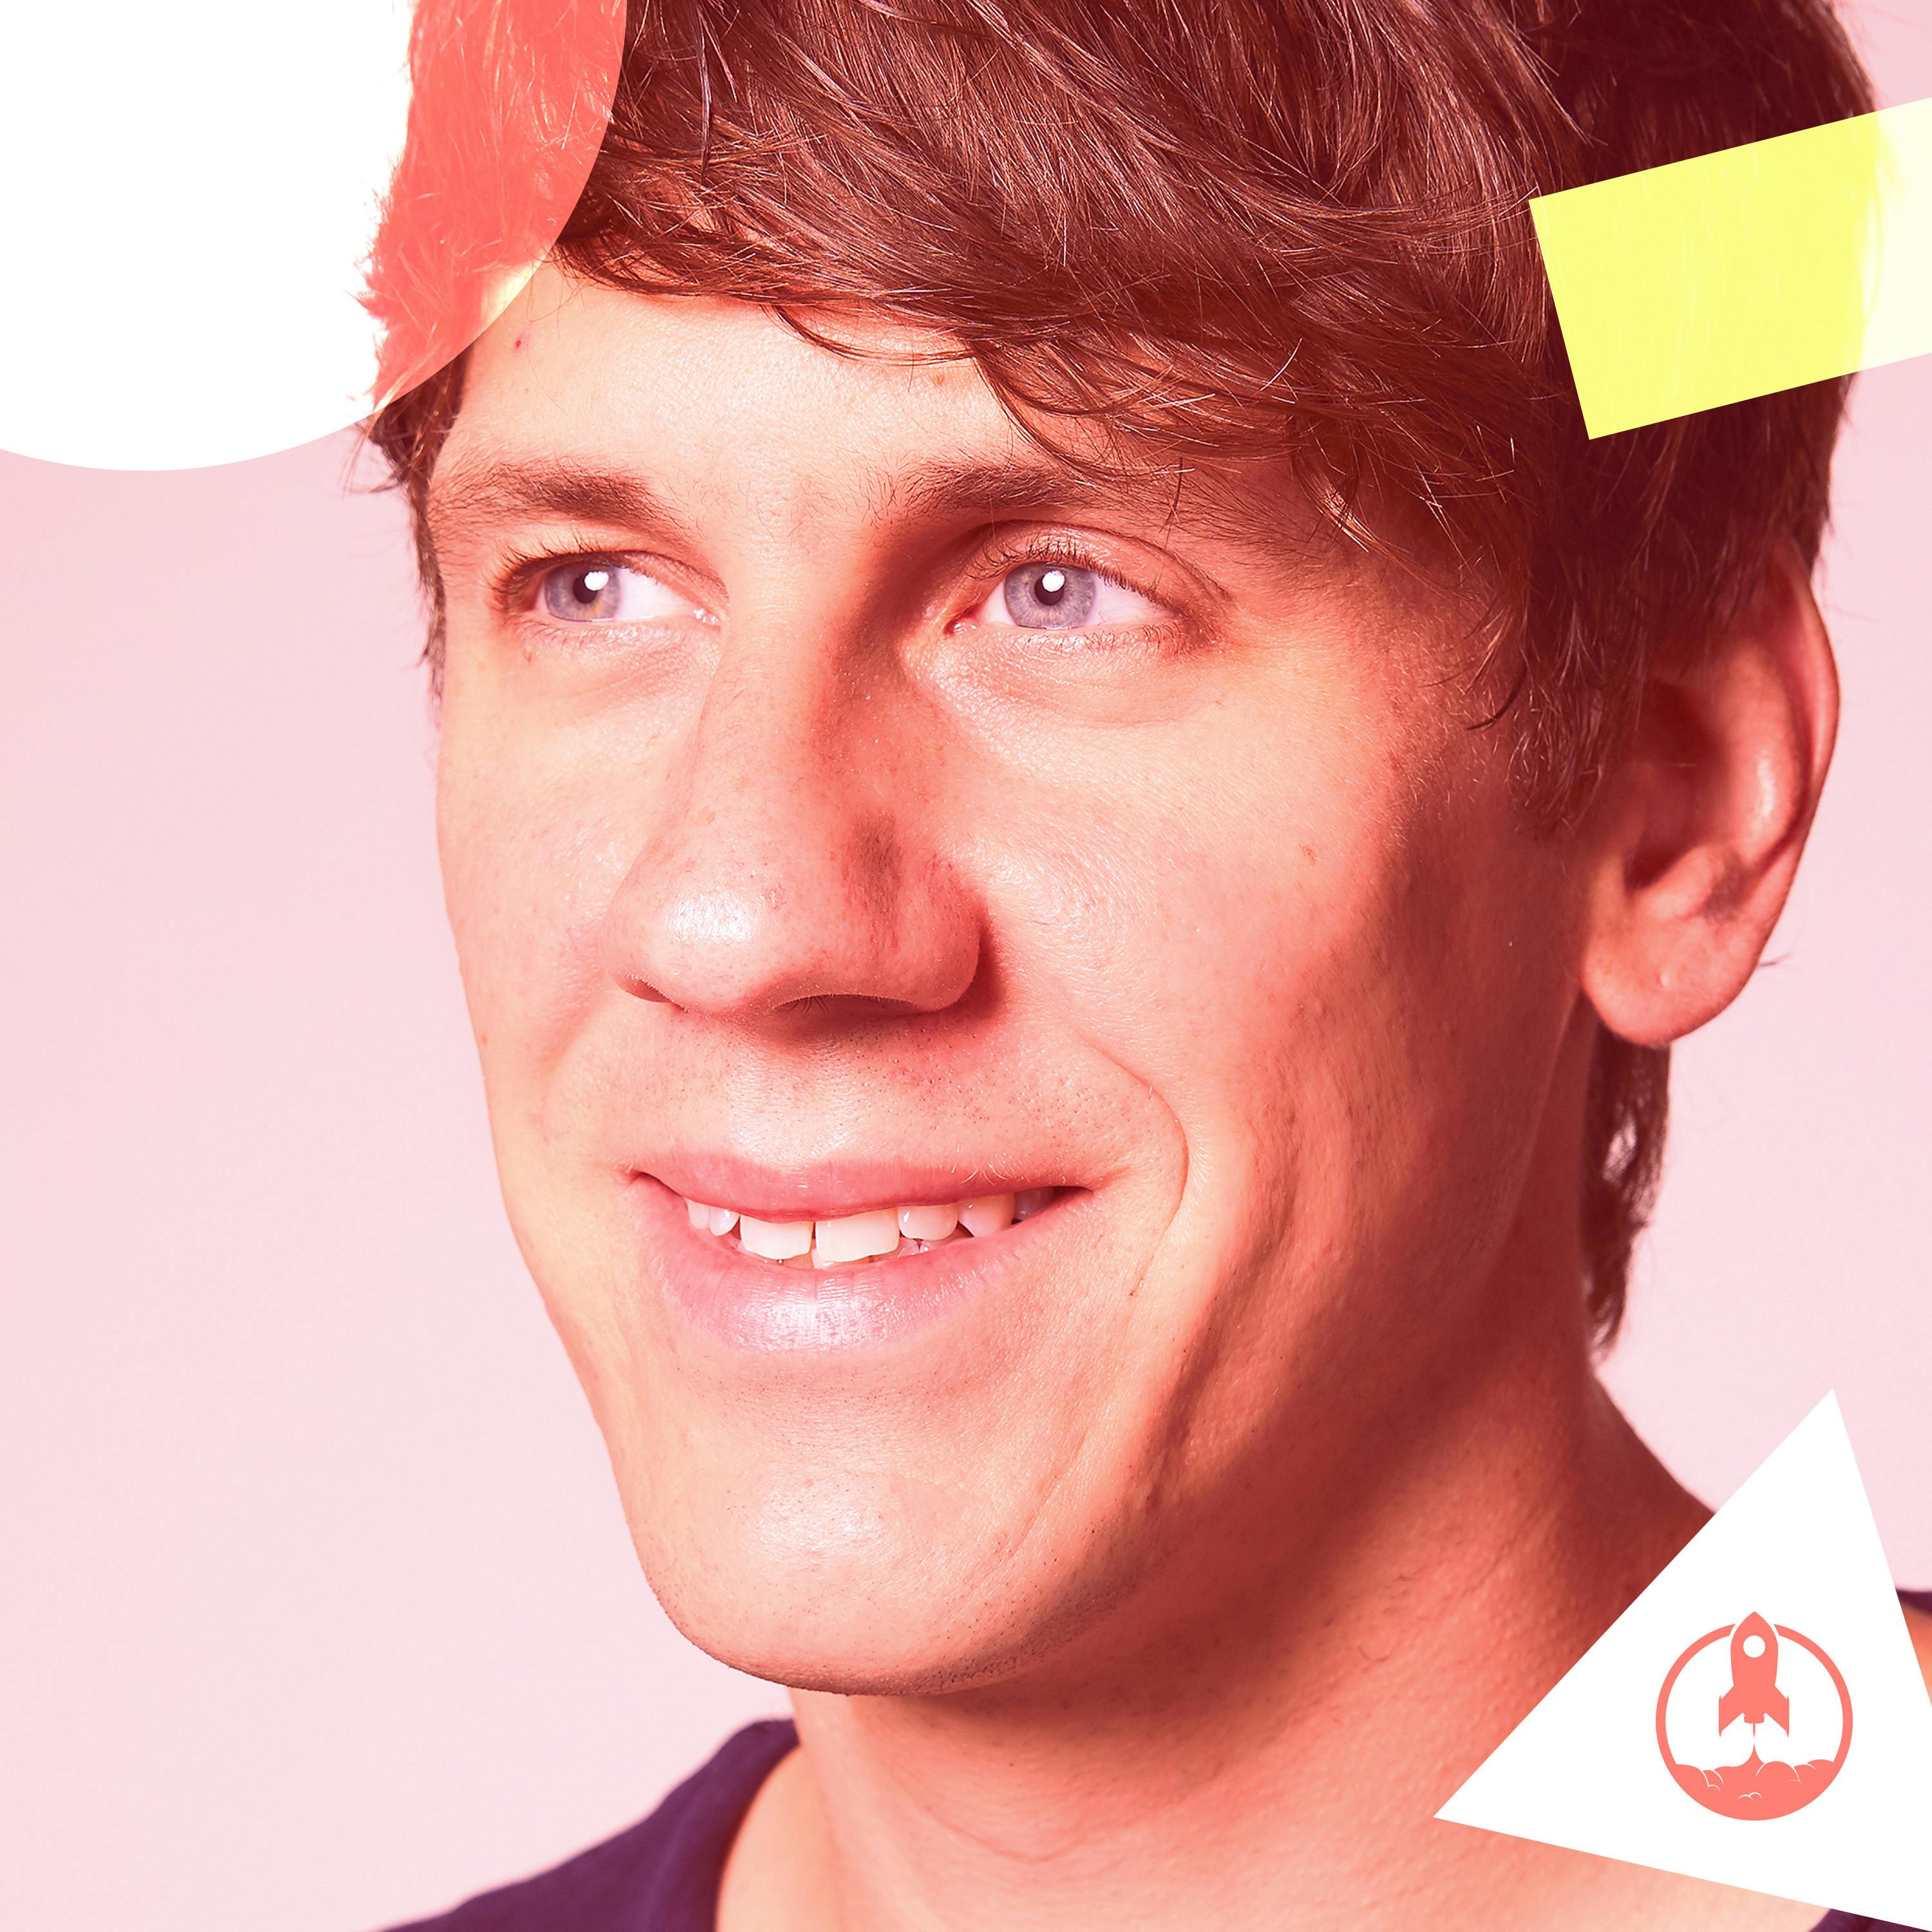 Interview: Dennis Crowley of Foursquare on Startups, Achieving Greatness and the Early Days of Foursquare